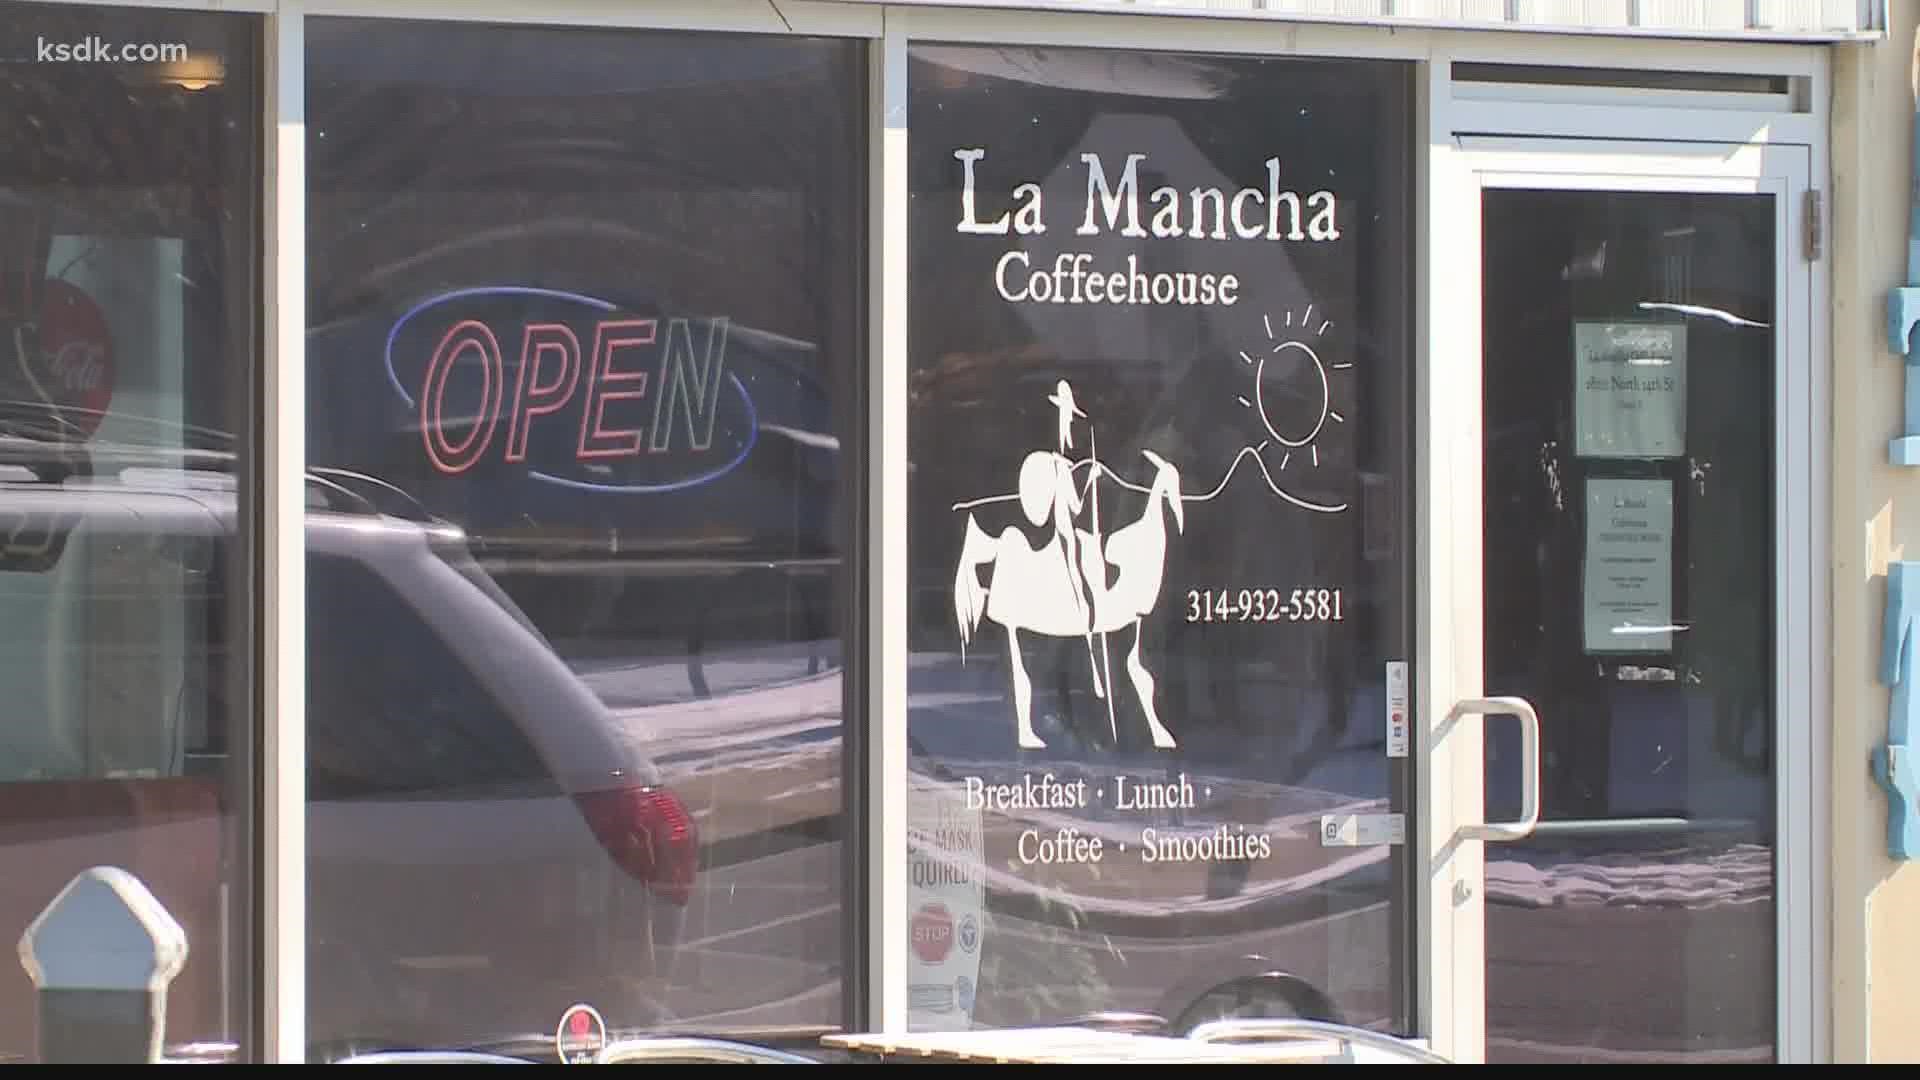 The coffeehouse has been a staple in Old North for 11 years. La Mancha will celebrate its last day with a St. Patrick's Day goodbye party.